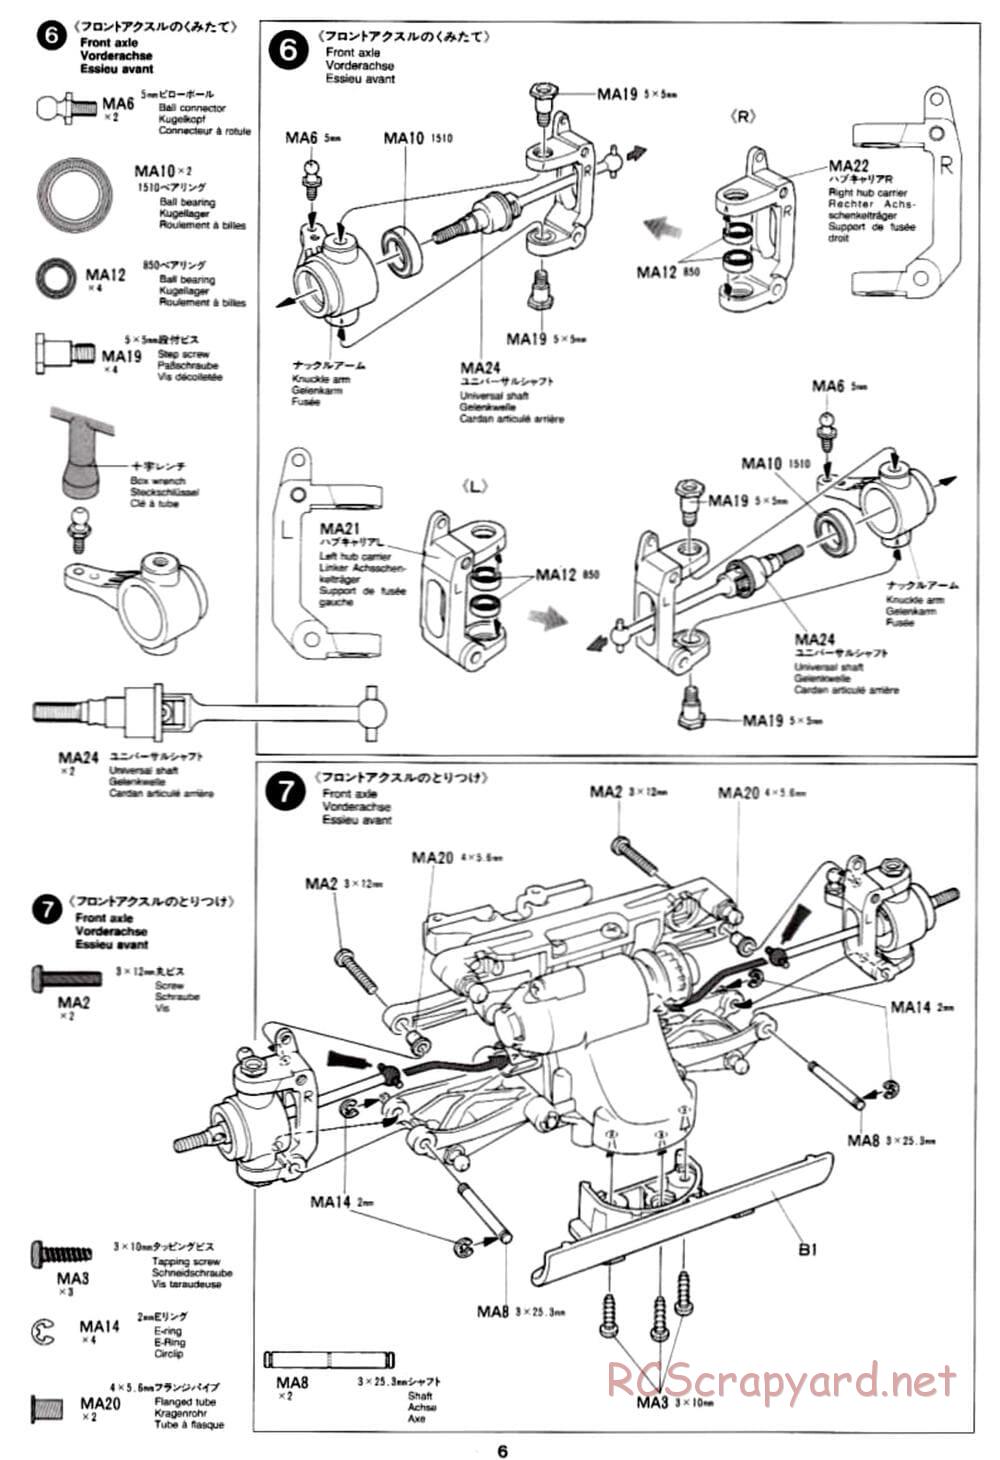 Tamiya - TA-03R TRF Special Edition Chassis - Manual - Page 6